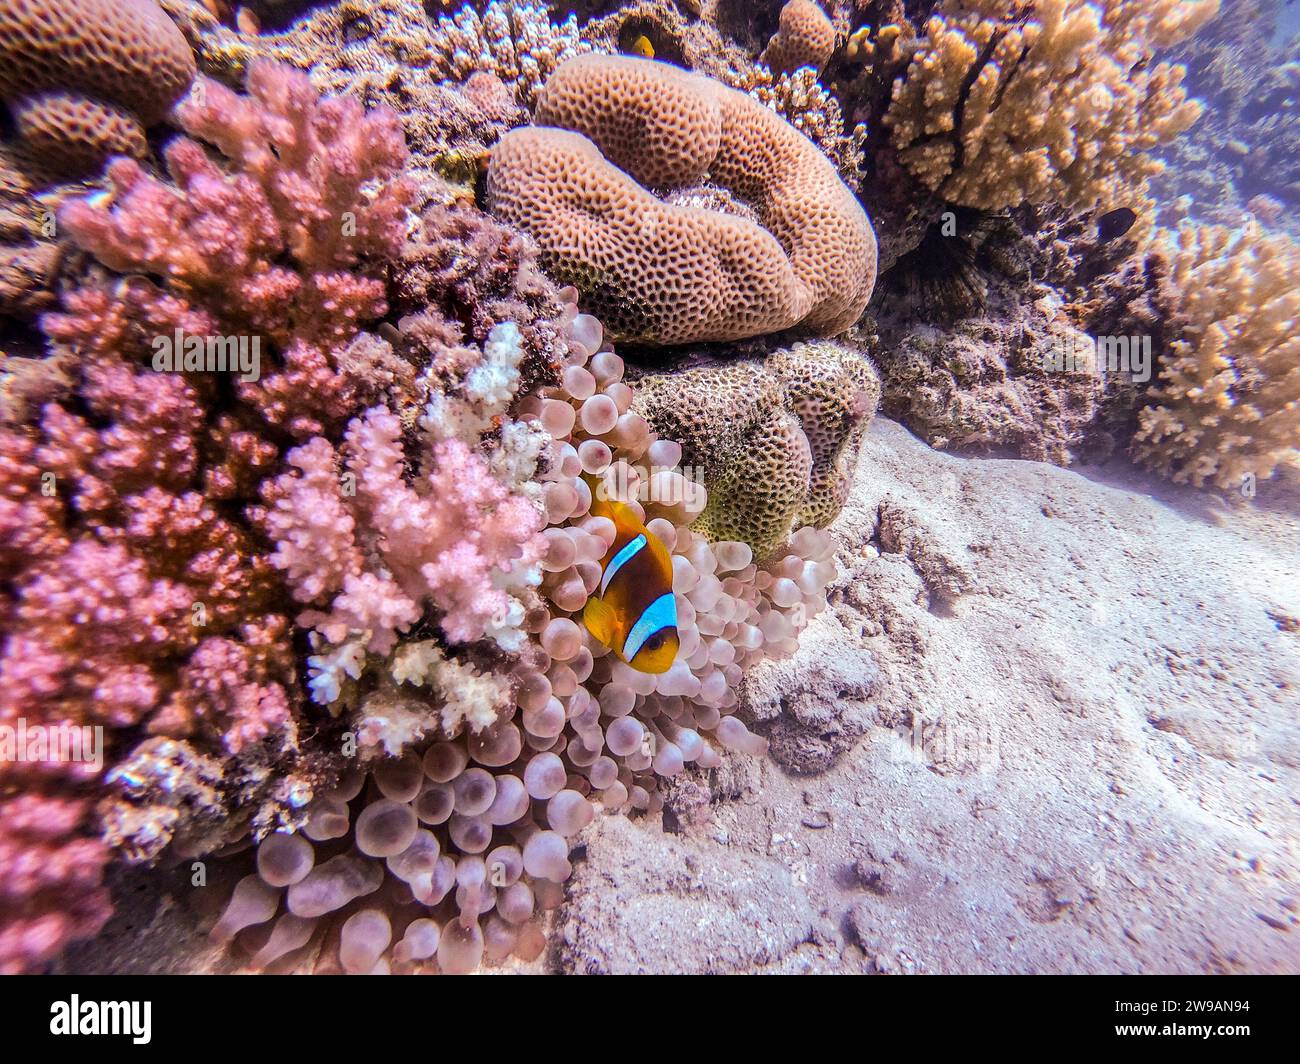 Close up view of Colorful tropical fish Red sea clown fish or amphiprion bicinctus (Amphiprion Inae) hiding in anemone its natural shelter on a coral Stock Photo